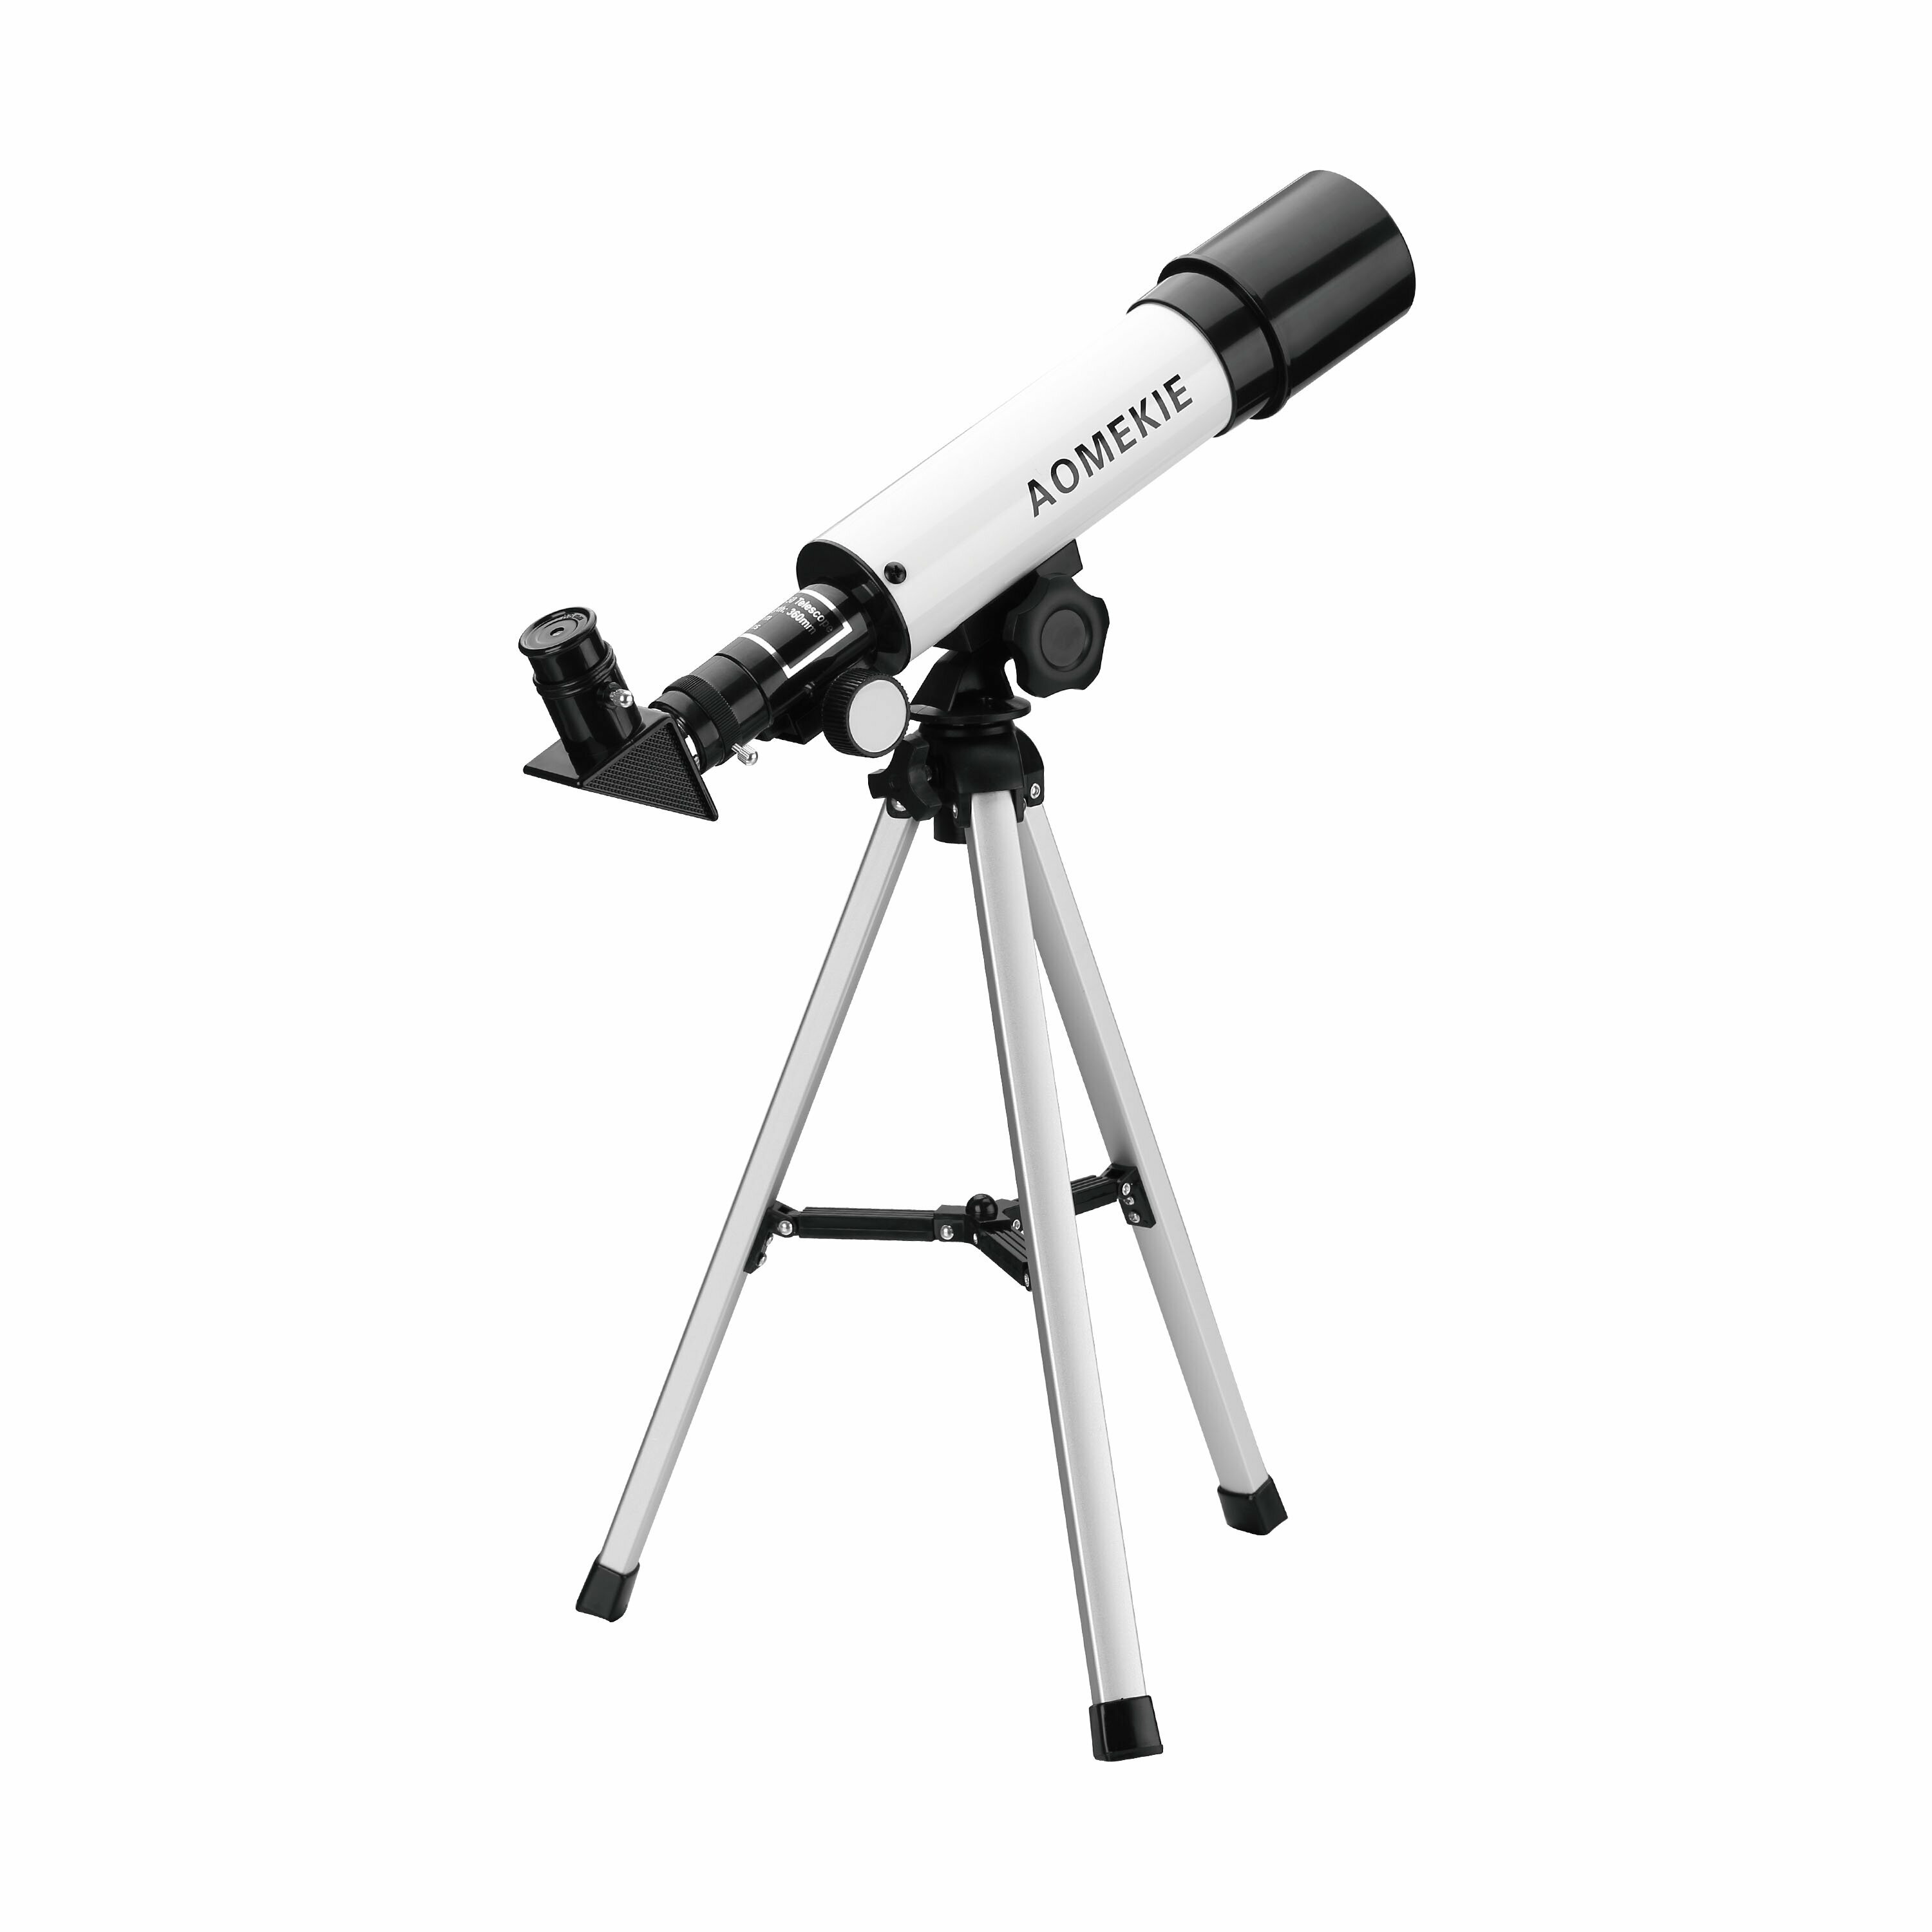 

[EU Direct] AOMEKIE Astronomical Telescope for Kids 50/360mm Telescope for Astronomy Beginners with Carrying Case Tripod